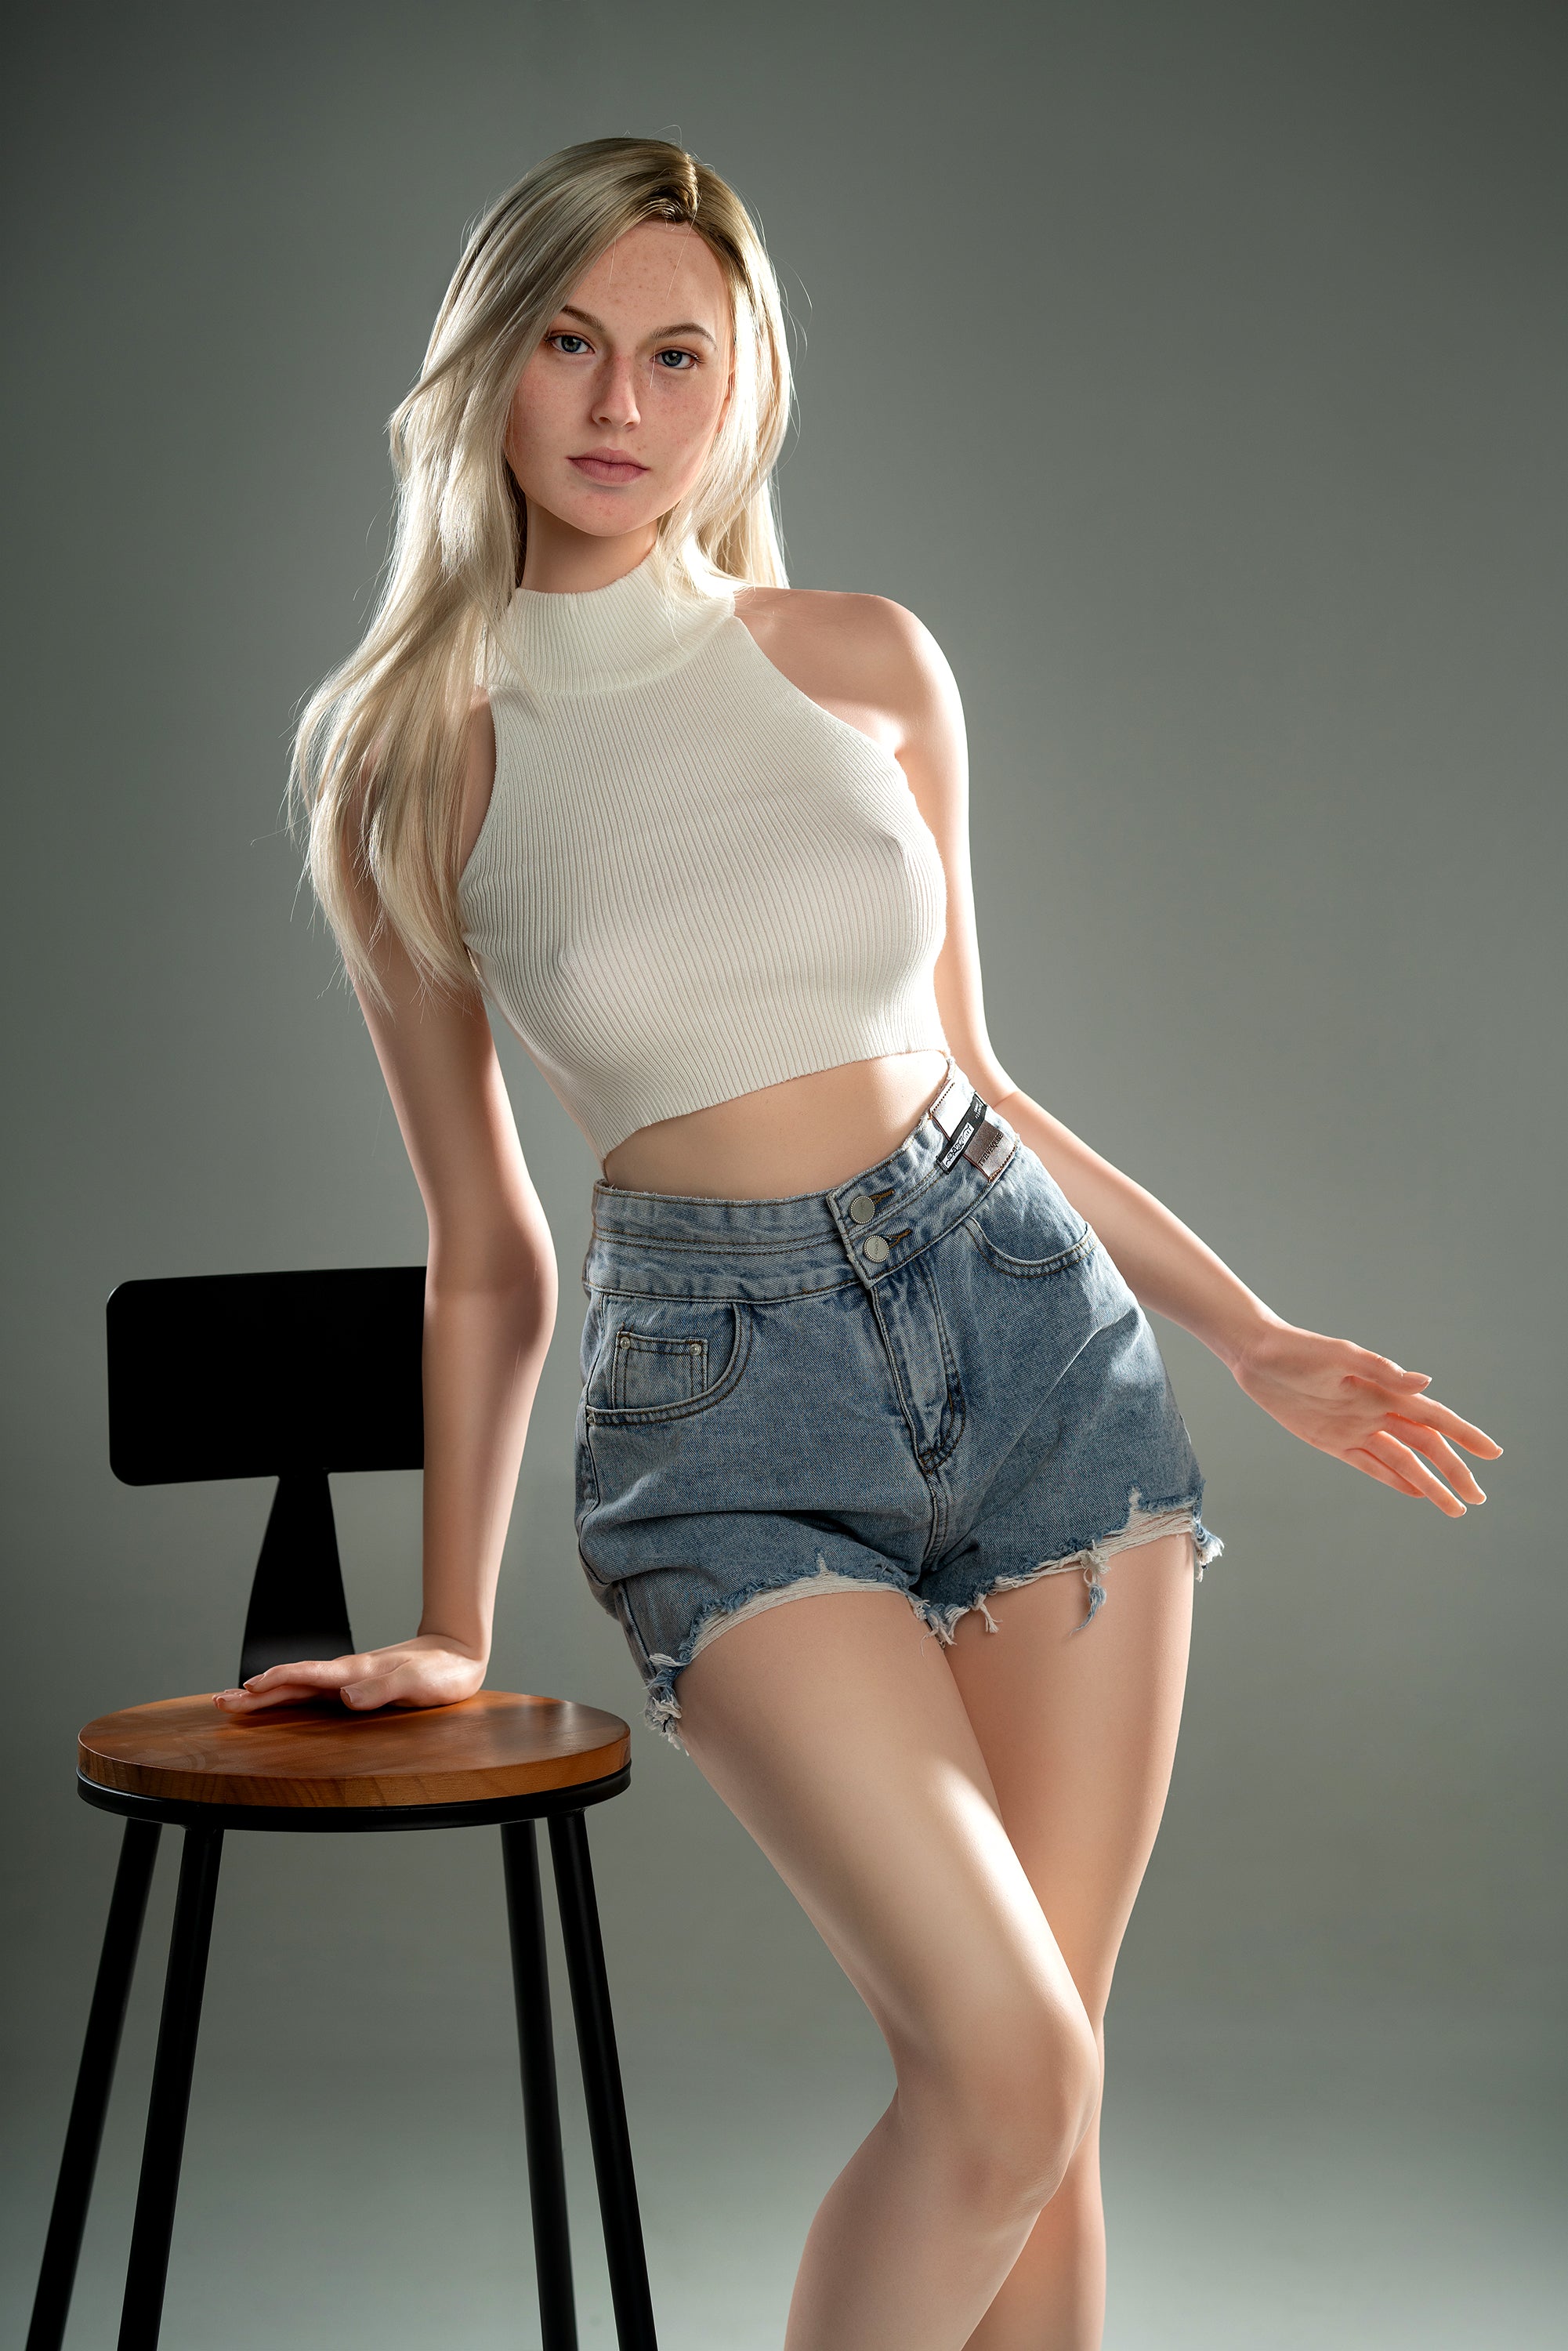 Zelex Doll 175 cm E Silicone - Evelina | Buy Sex Dolls at DOLLS ACTUALLY